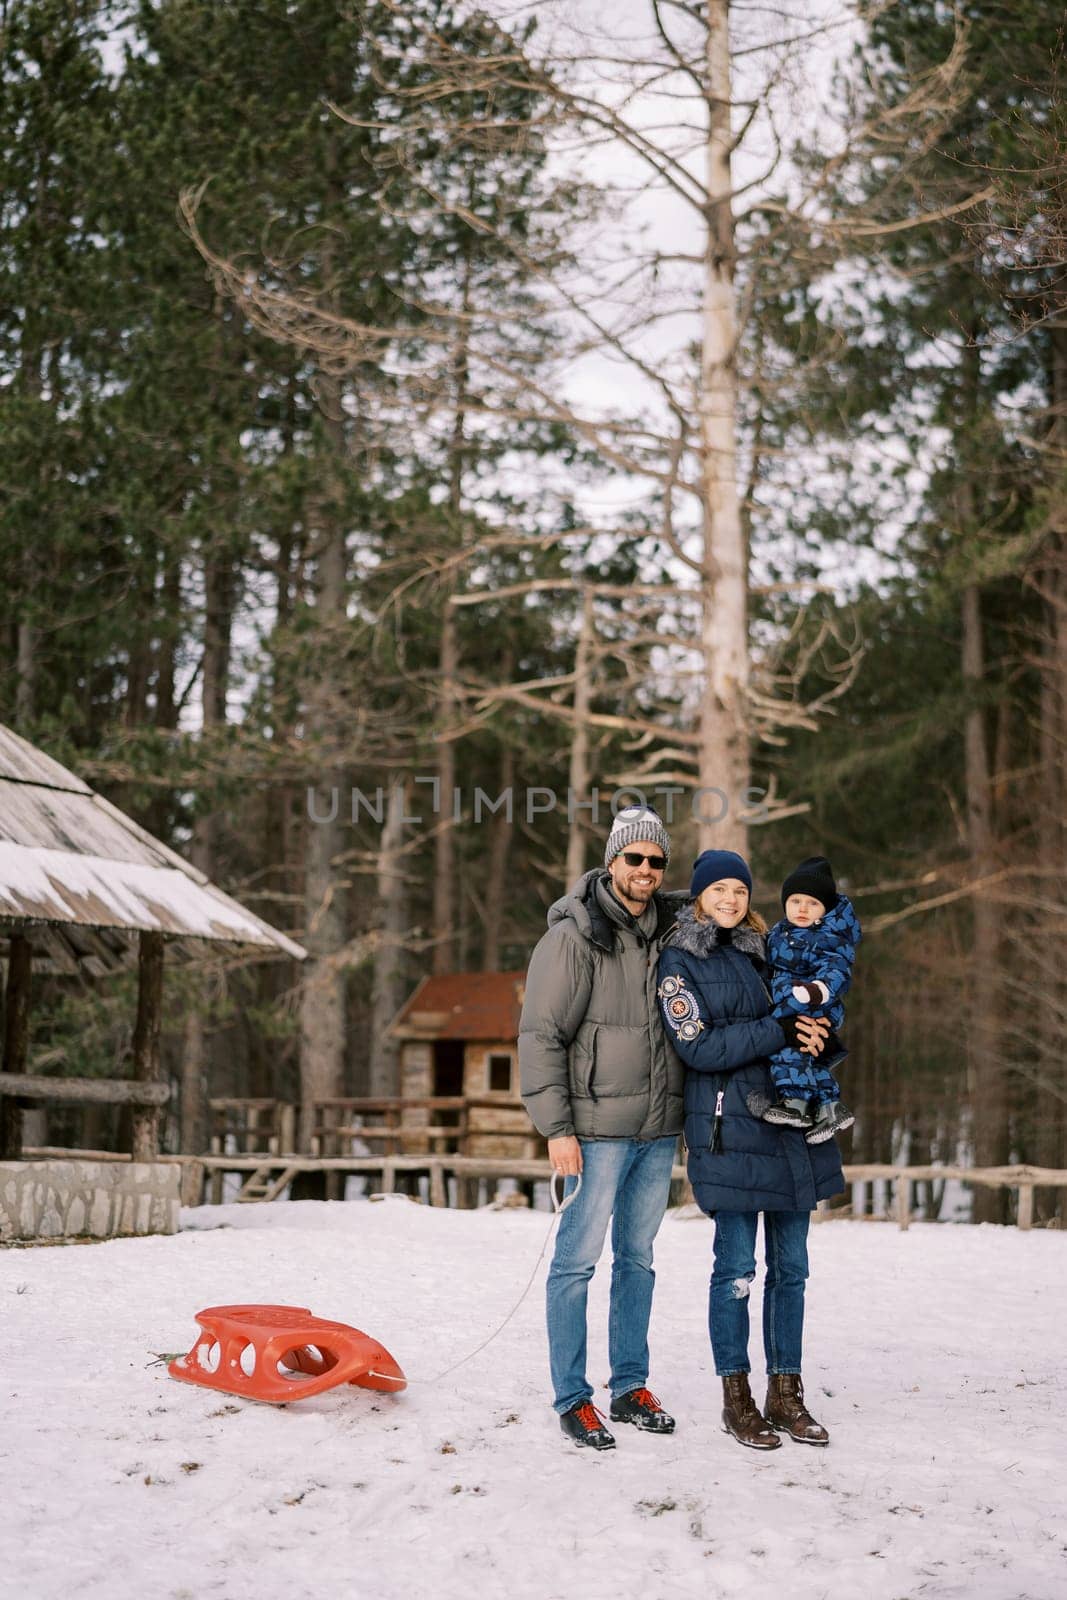 Smiling dad with sled stands hugging mom with a little boy in her arms in a snowy forest. High quality photo